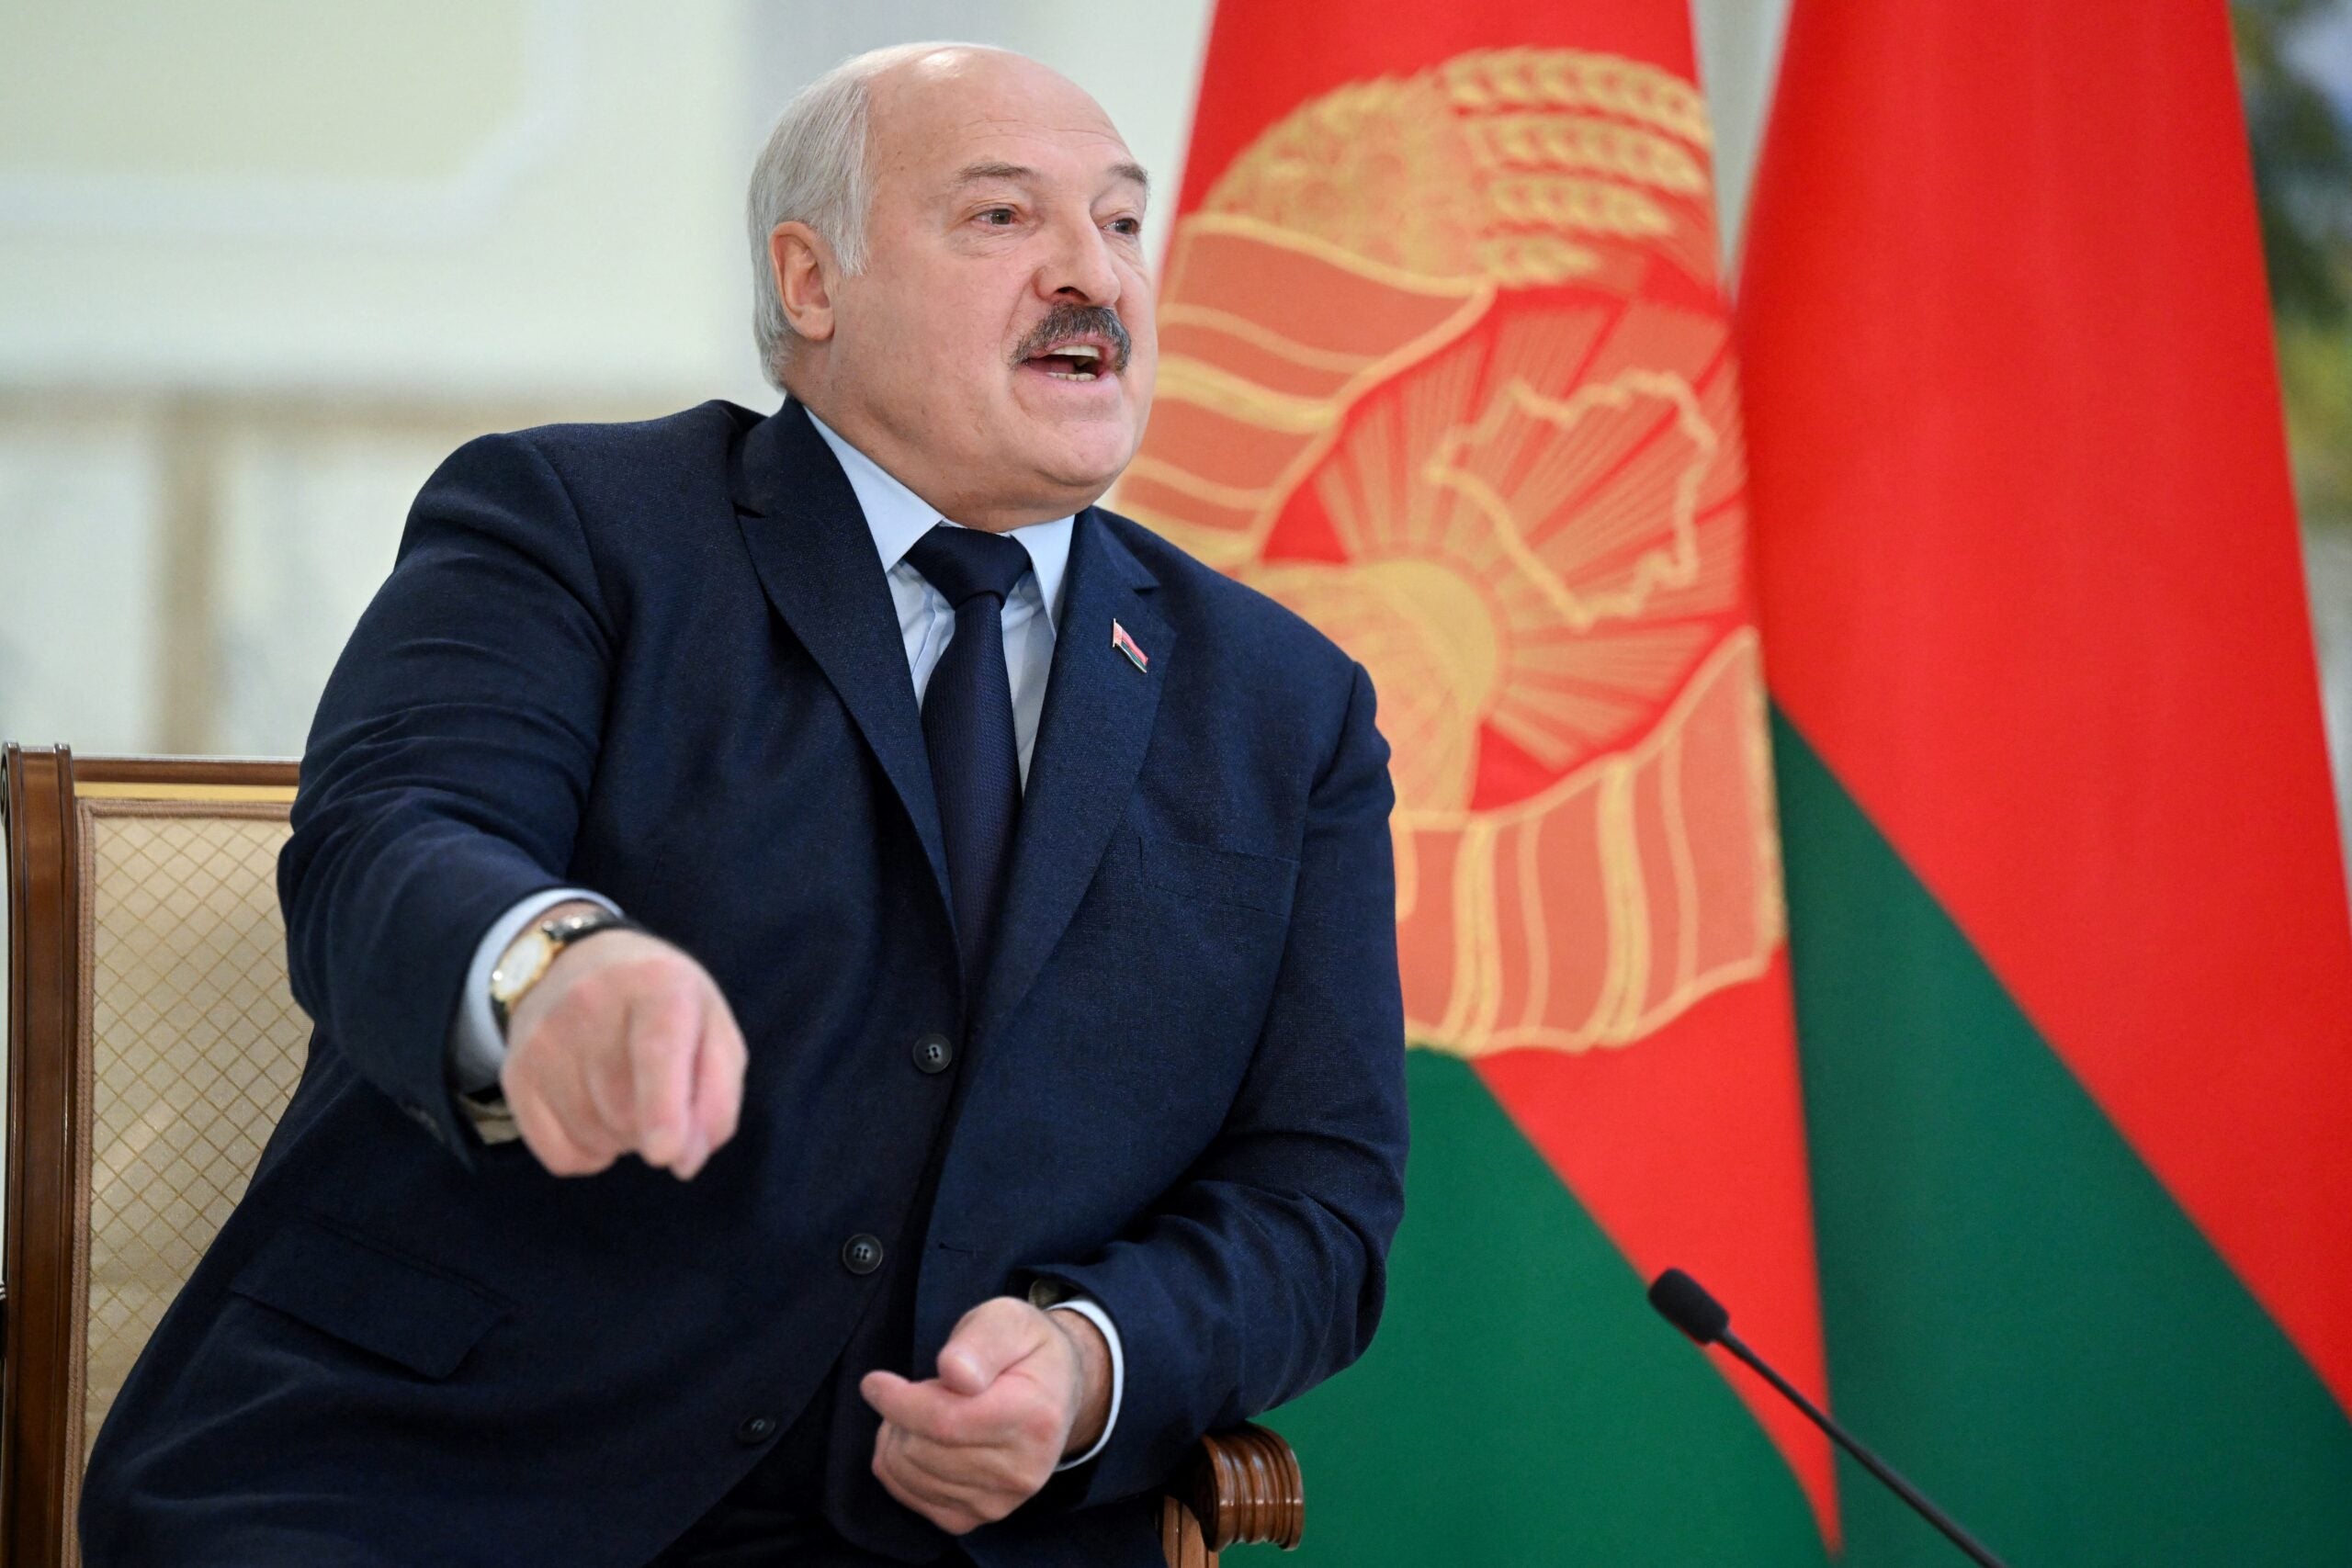 Belarus' President Alexander Lukashenko speaks as he meets with foreign media at his residence, the Independence Palace, in the capital Minsk on February 16, 2023. (Photo by Natalia KOLESNIKOVA / AFP) (Photo by NATALIA KOLESNIKOVA/AFP via Getty Images)